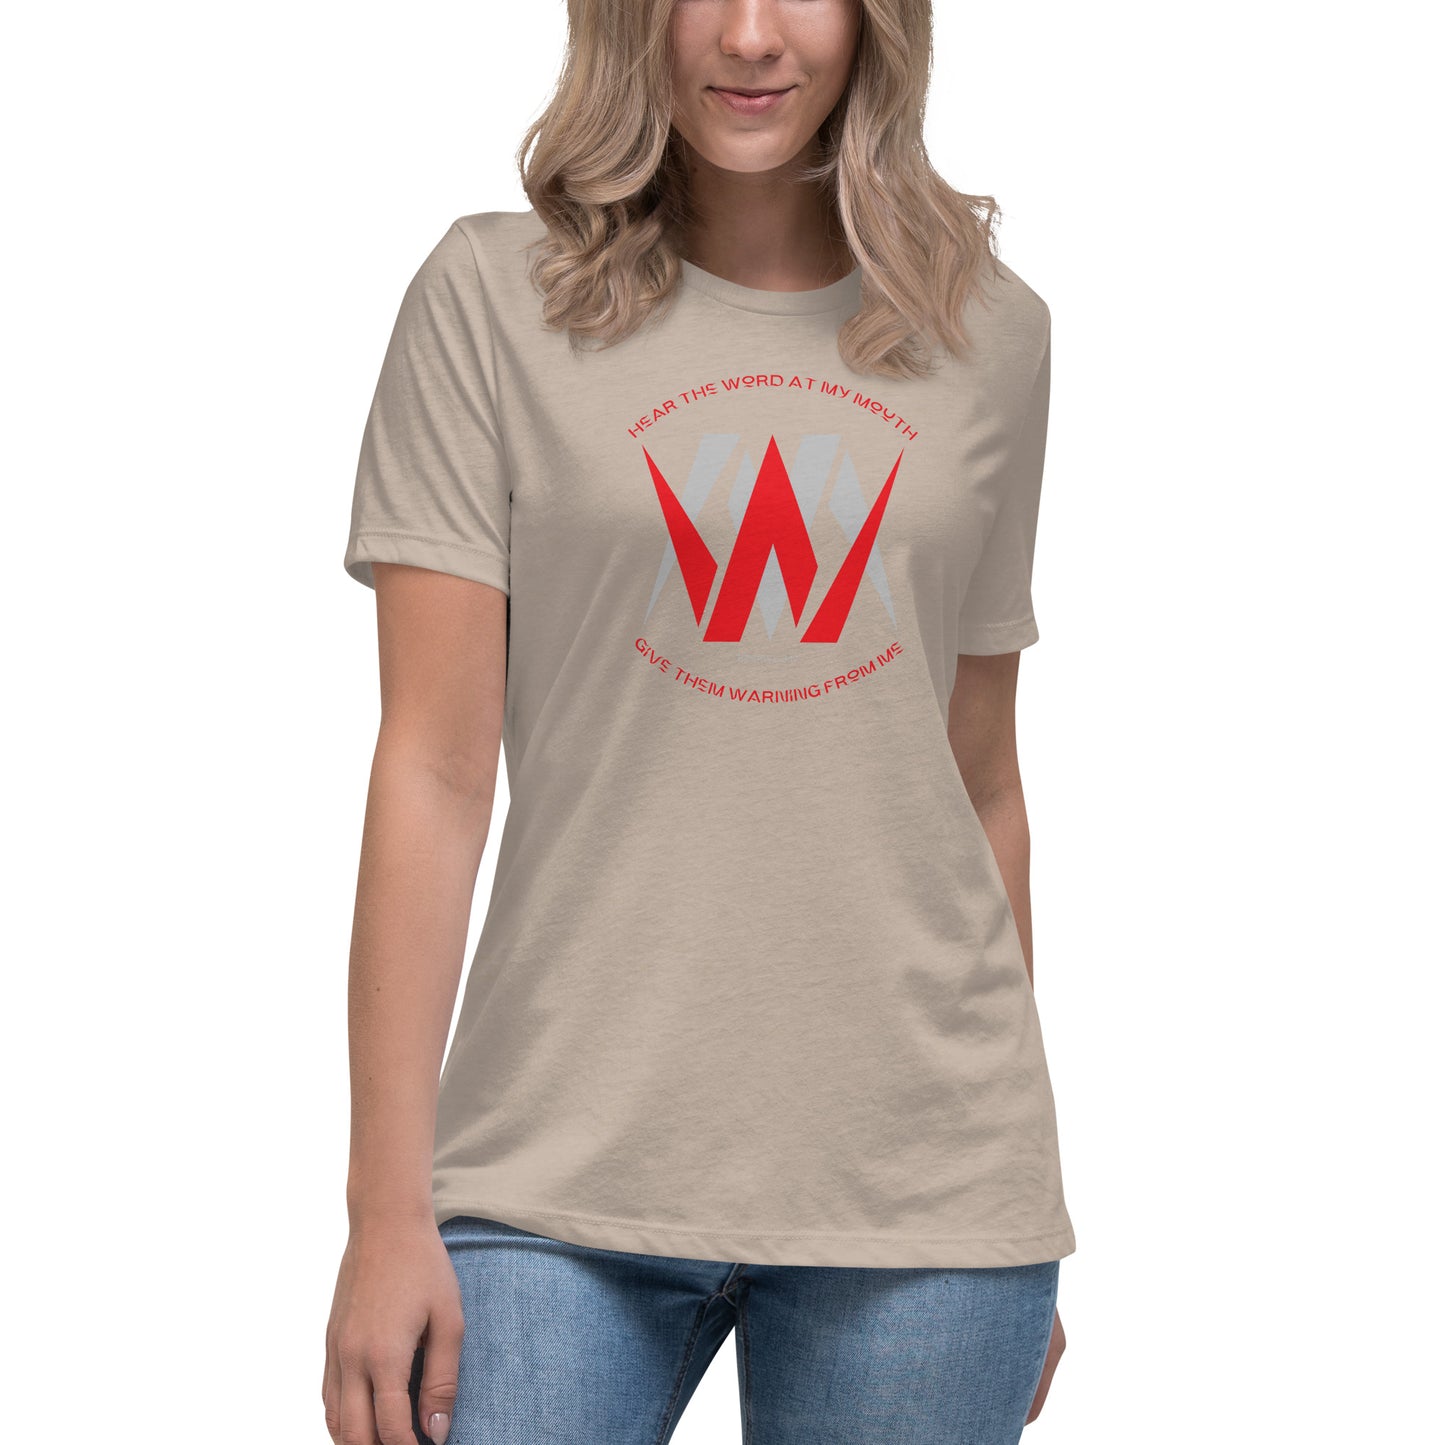 WM Hear The Word At My Mouth Give Them Warning From Me Women's Relaxed T-Shirt